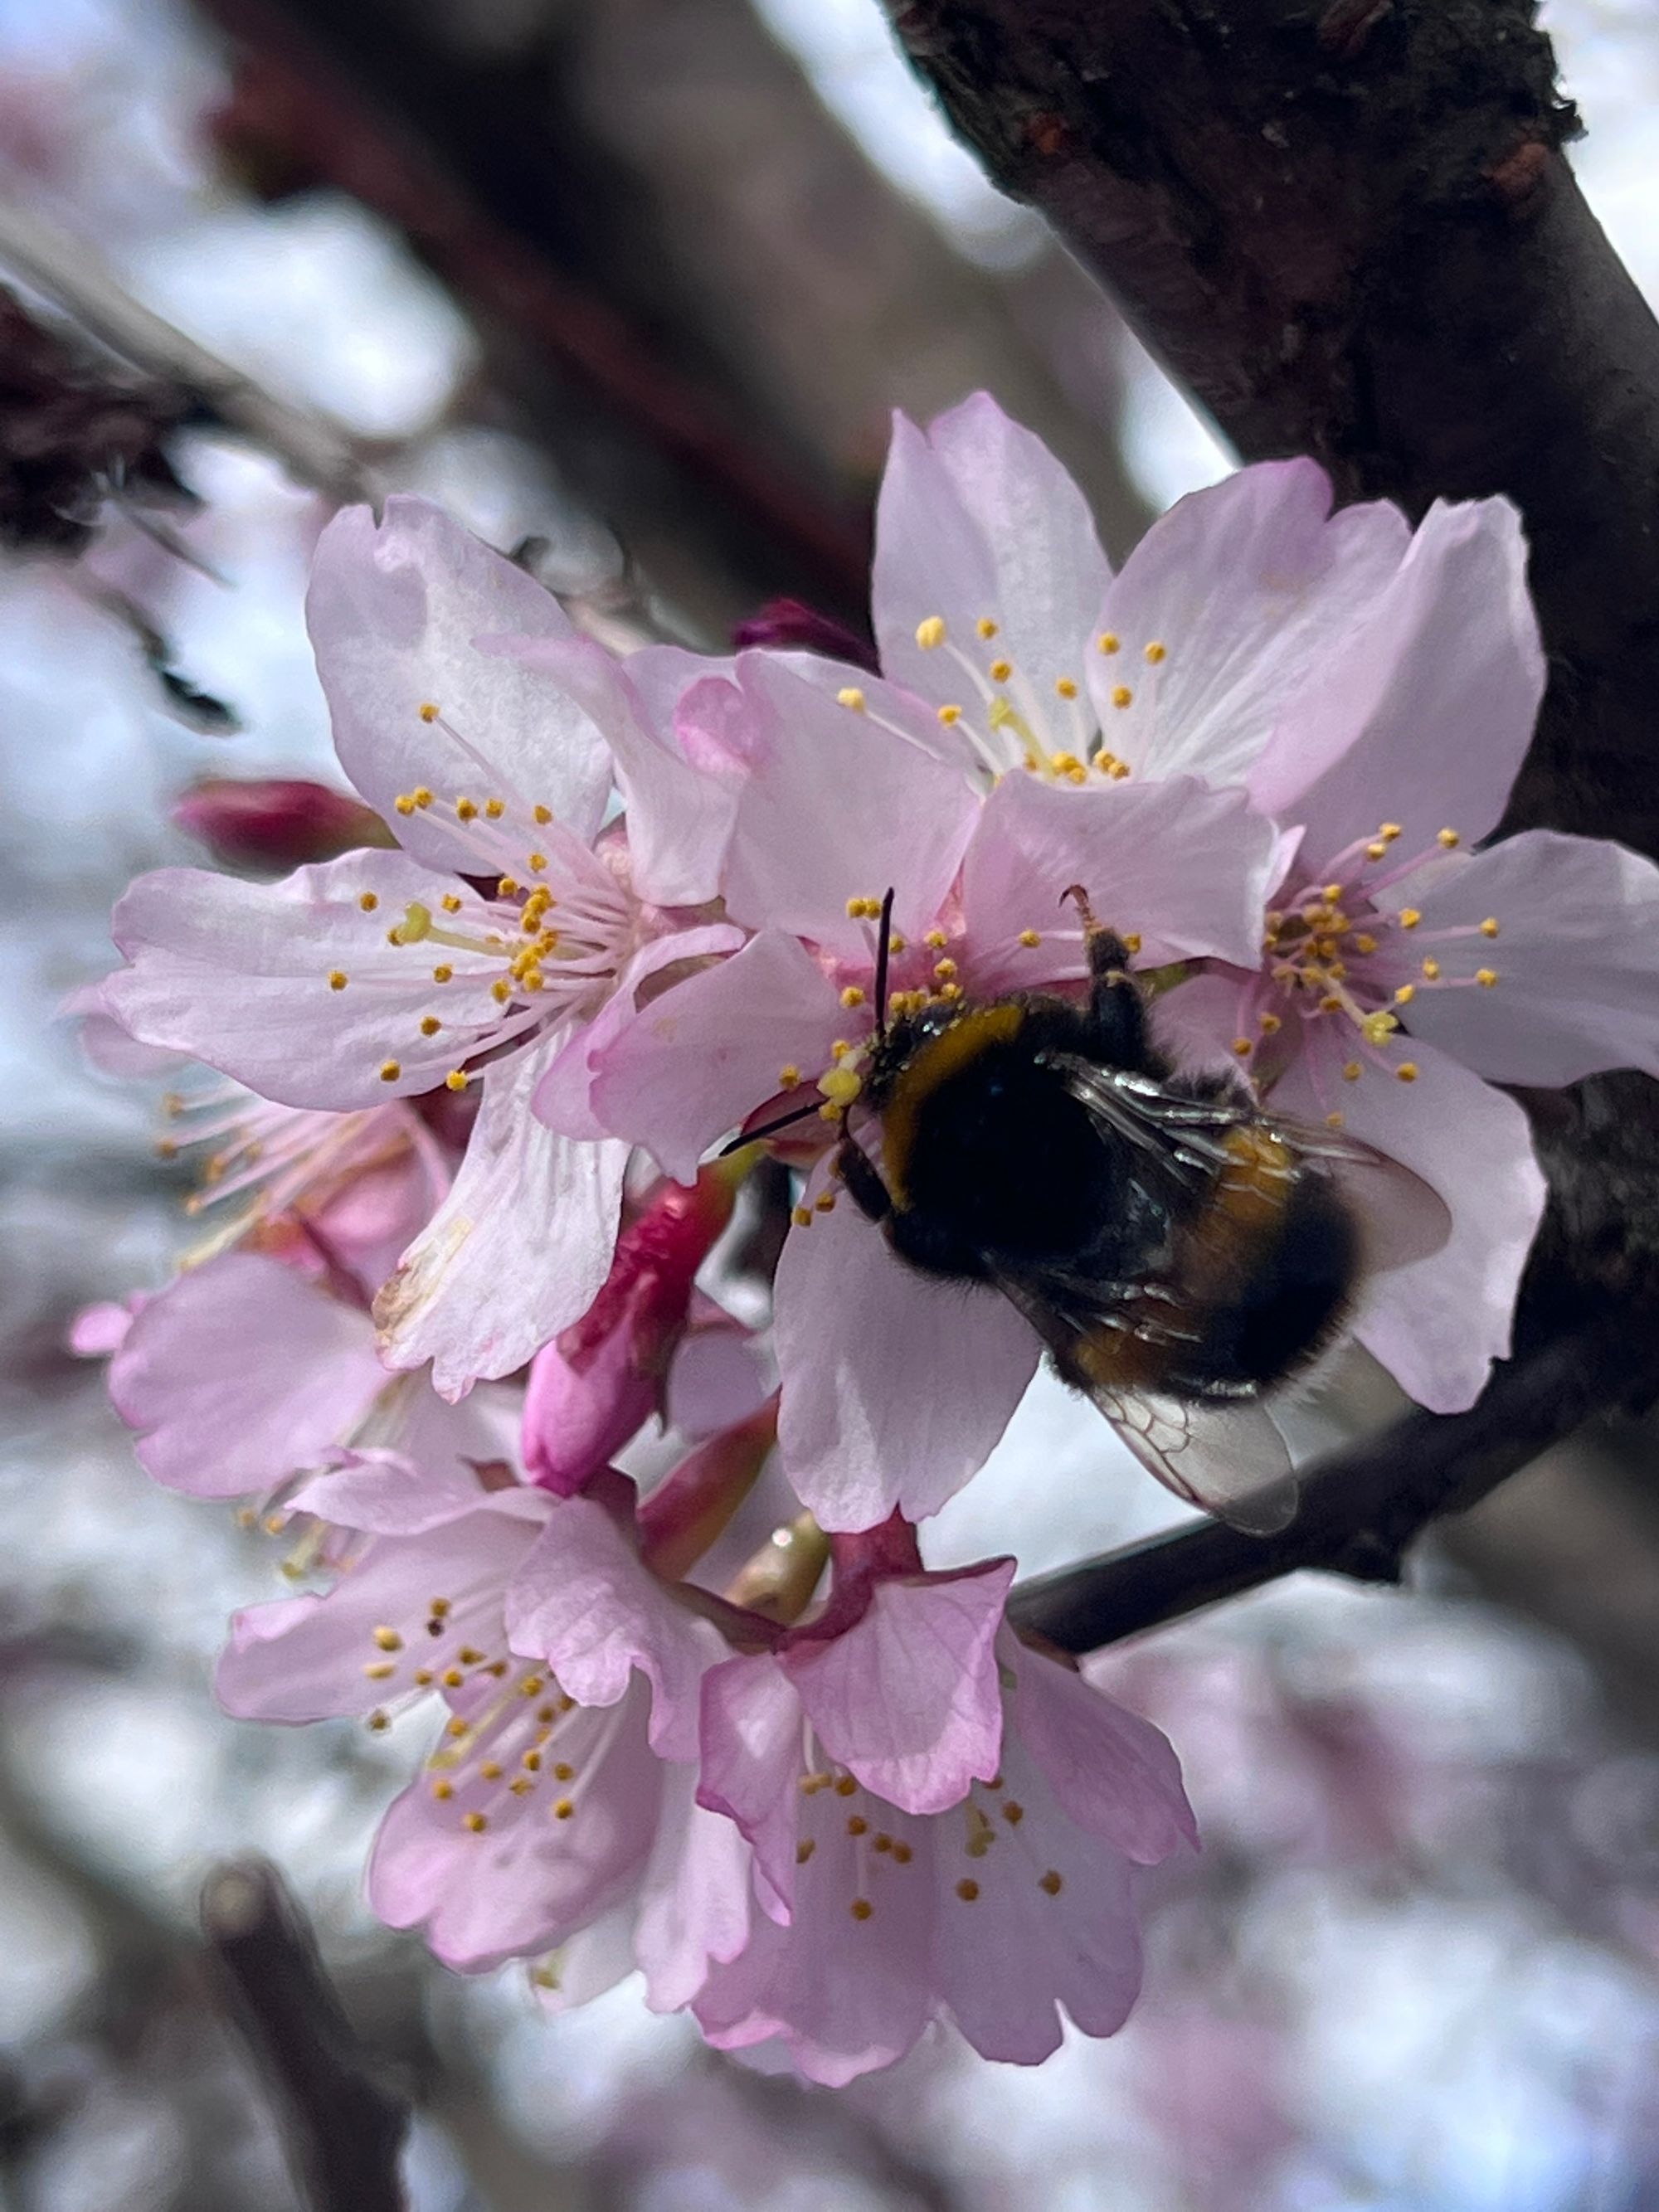 A fluffy bee feeds on a pink blossom flower on a tree.